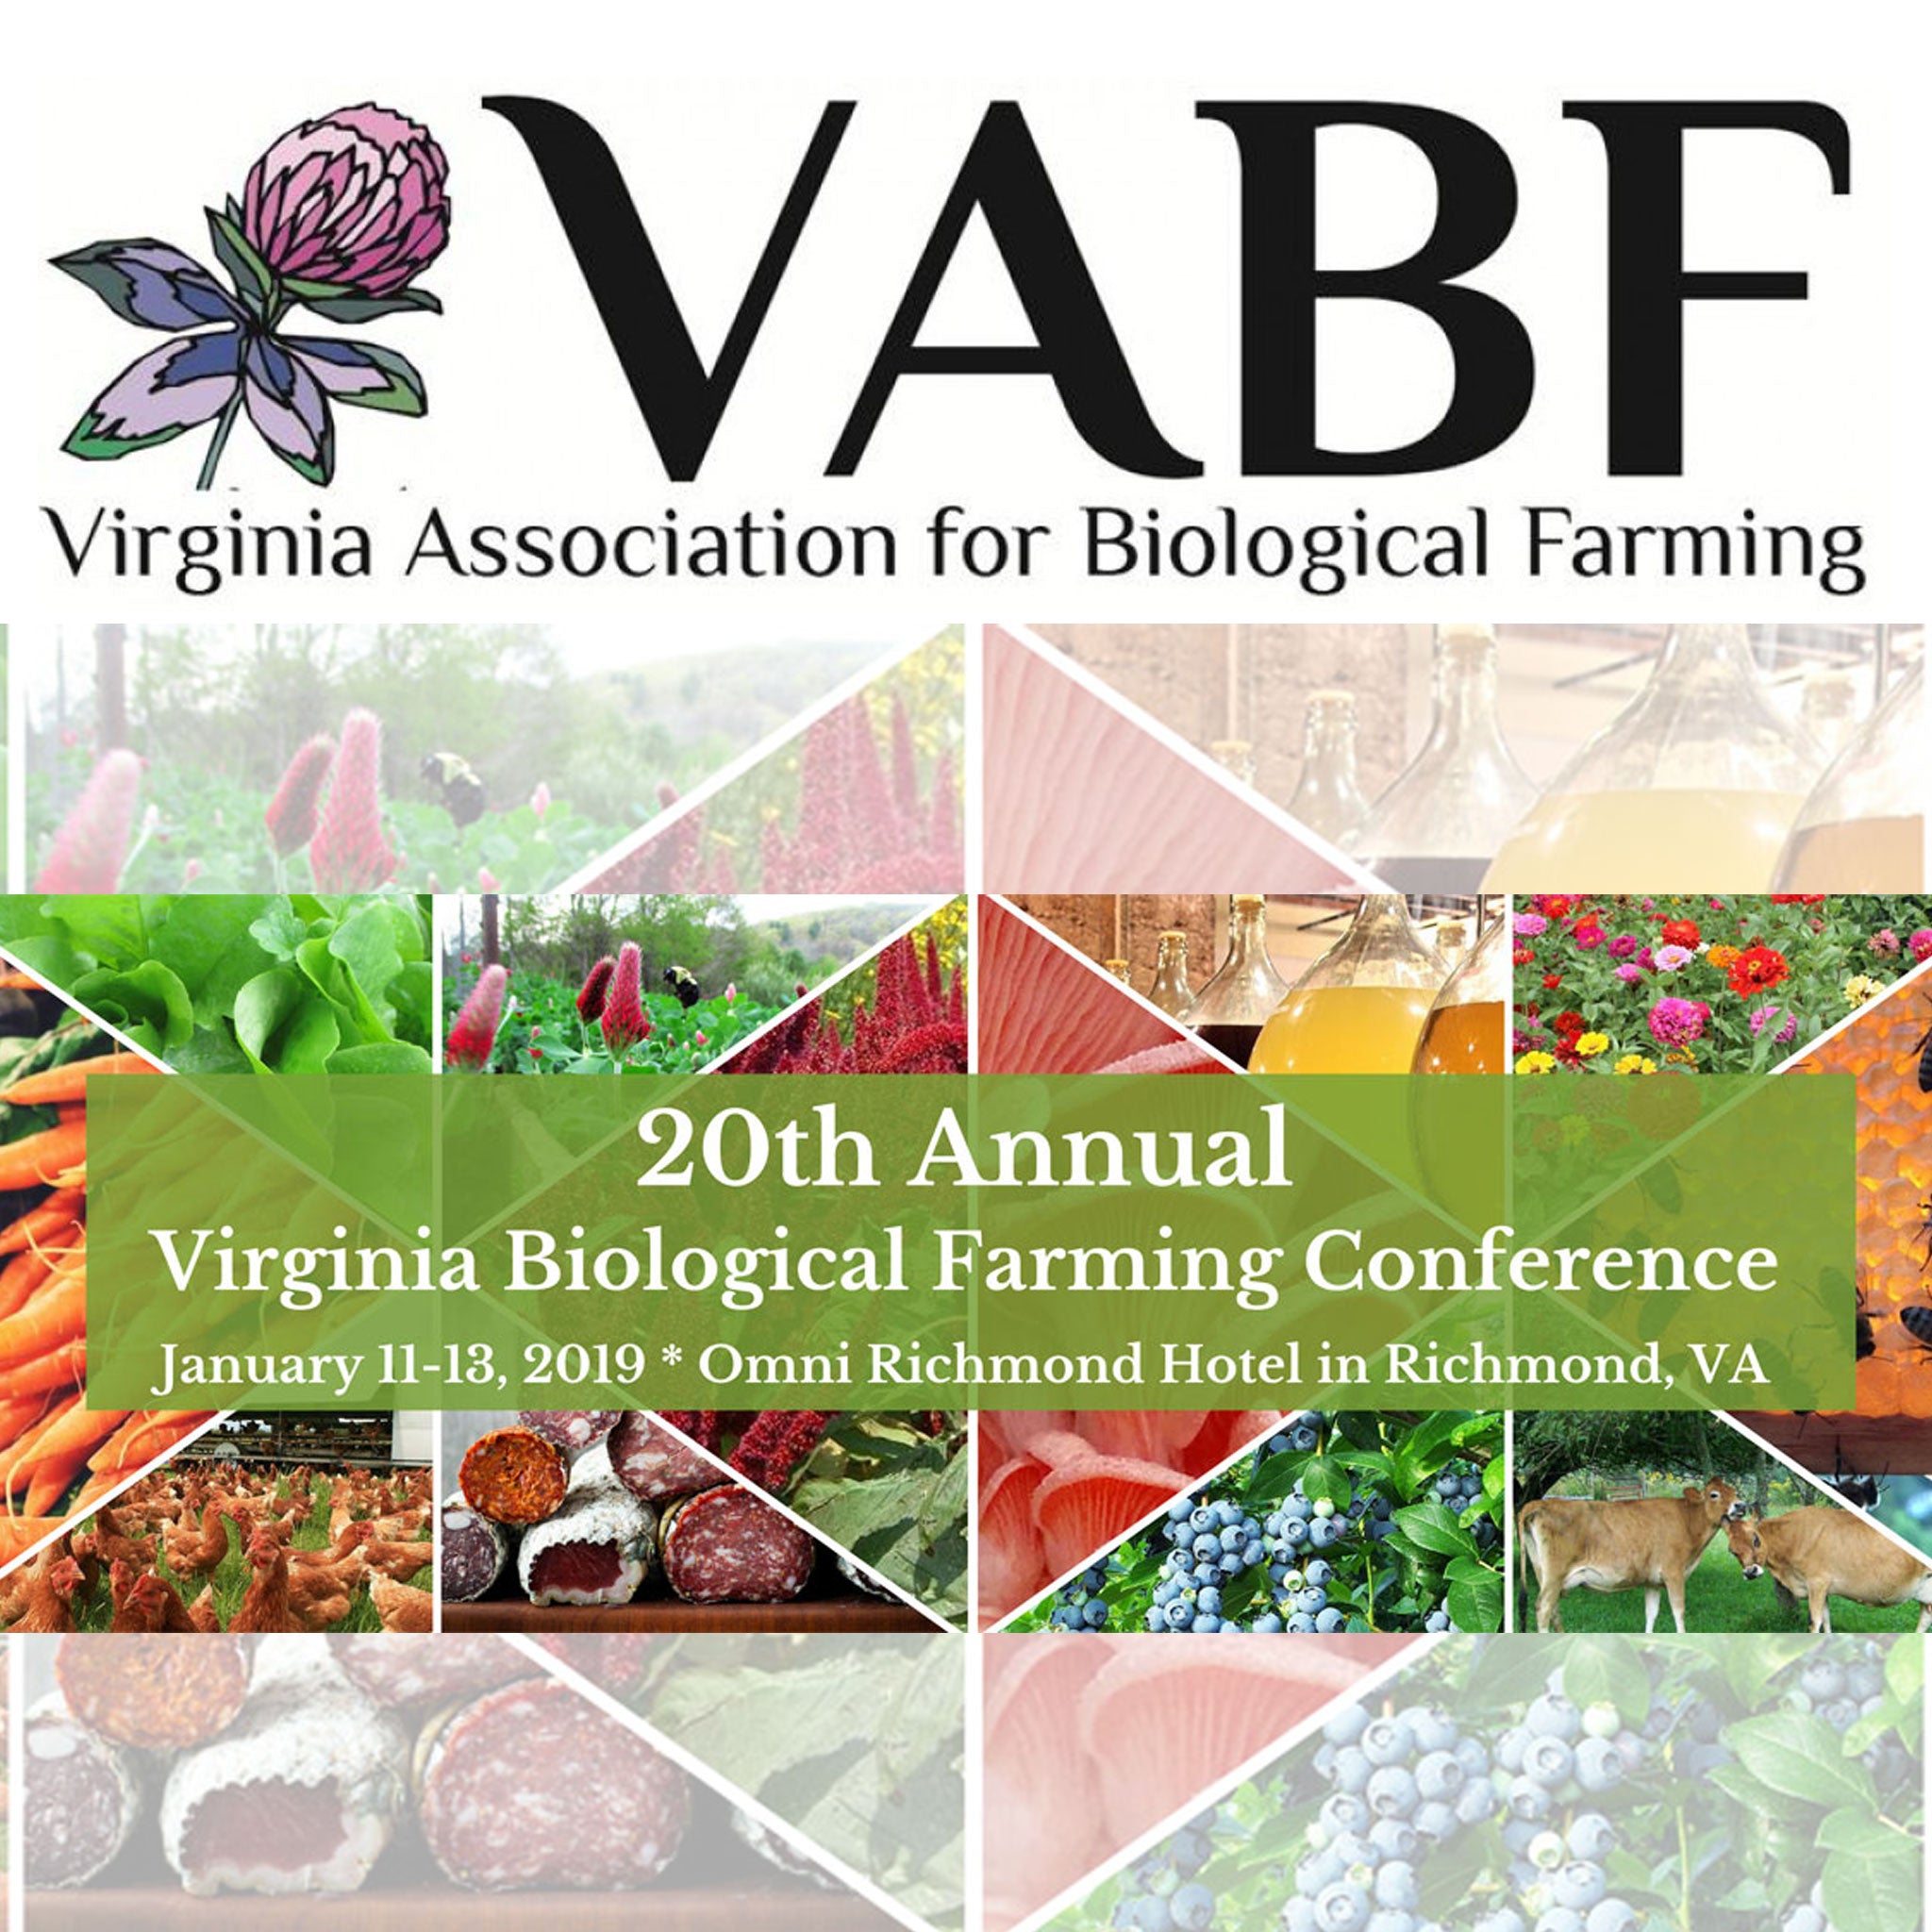 Virginia Association for Biological Farming Annual Conference 2019